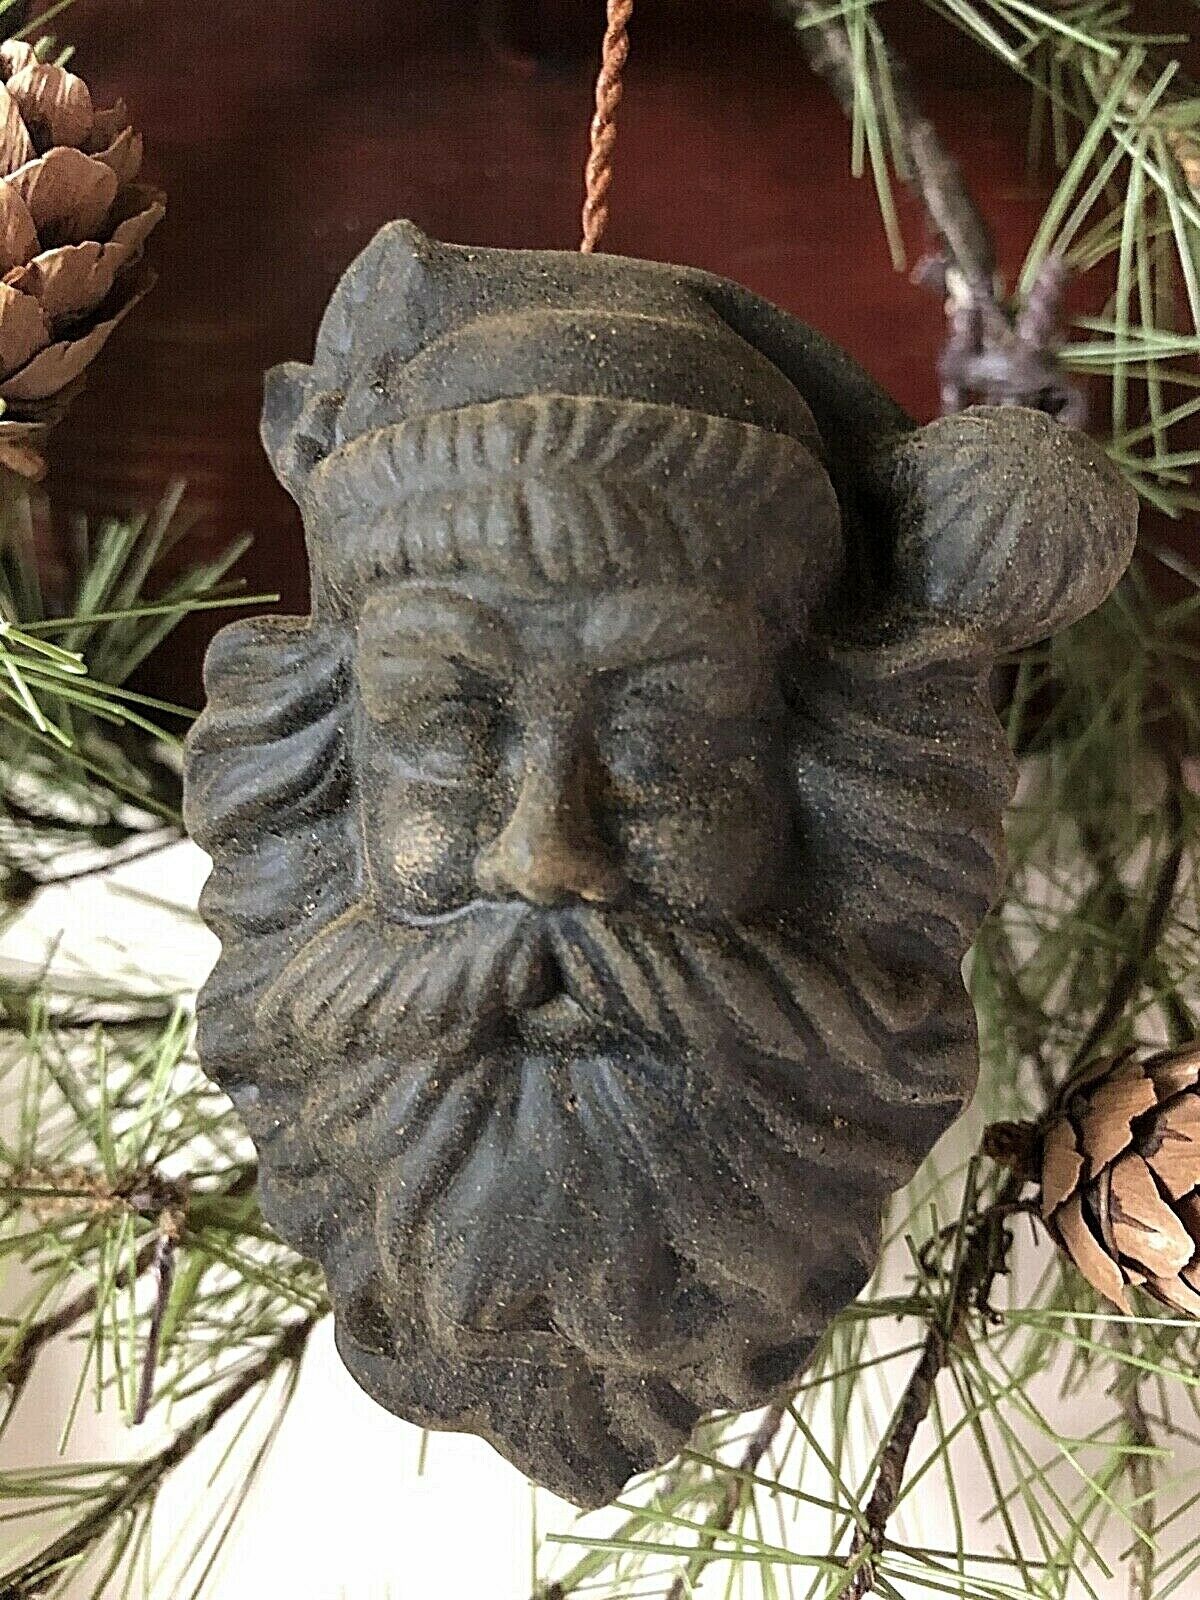 Primitive Country Blackened Beeswax Santa Face Ornament Christmas - The Primitive Pineapple Collection